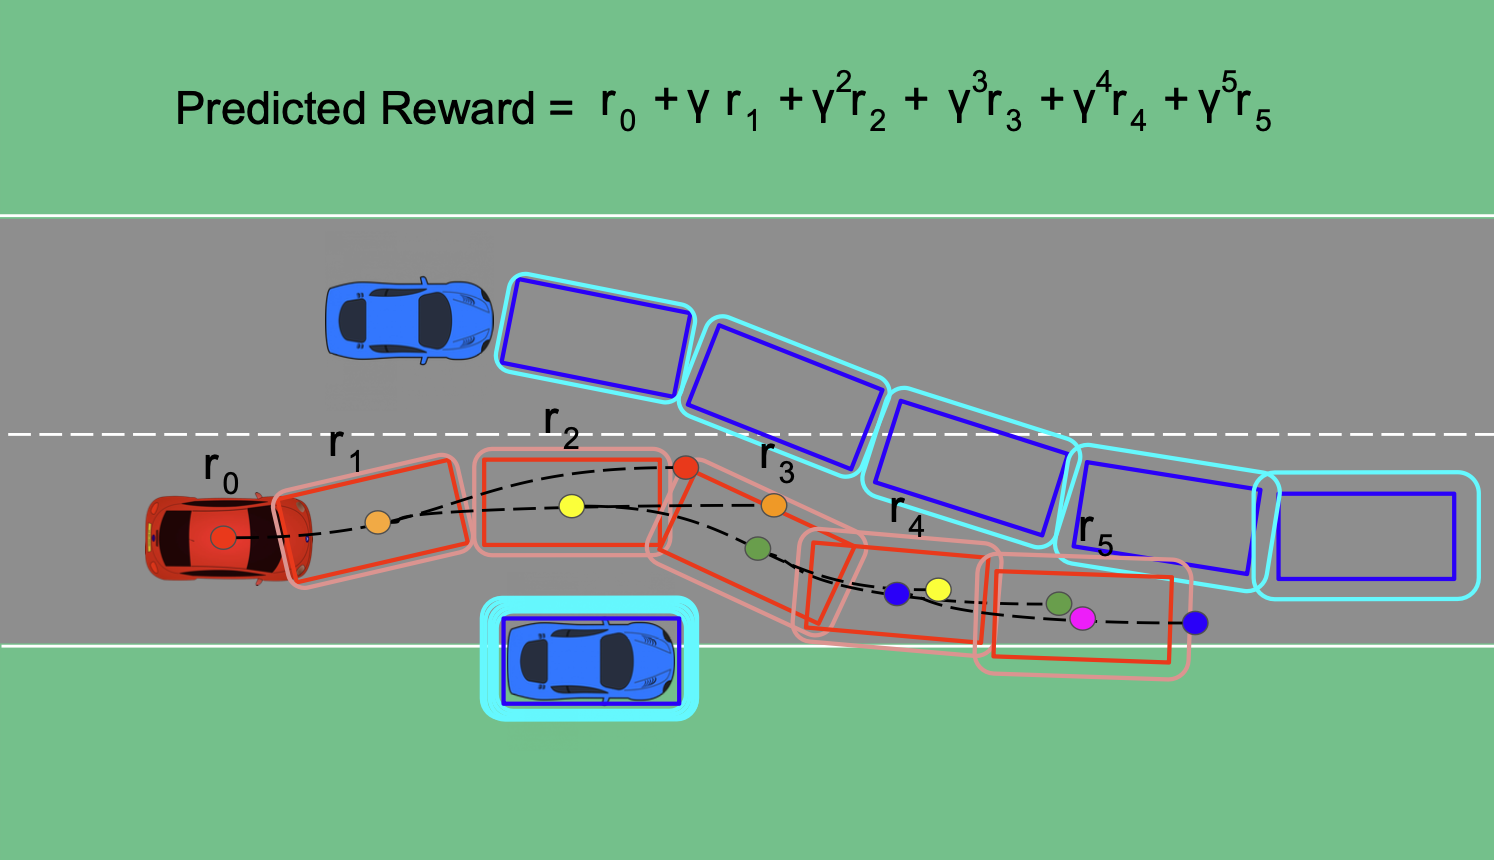 Trajectory Planning for Autonomous Vehicle Using Iterative Reward Prediction in Reinforcement Learning